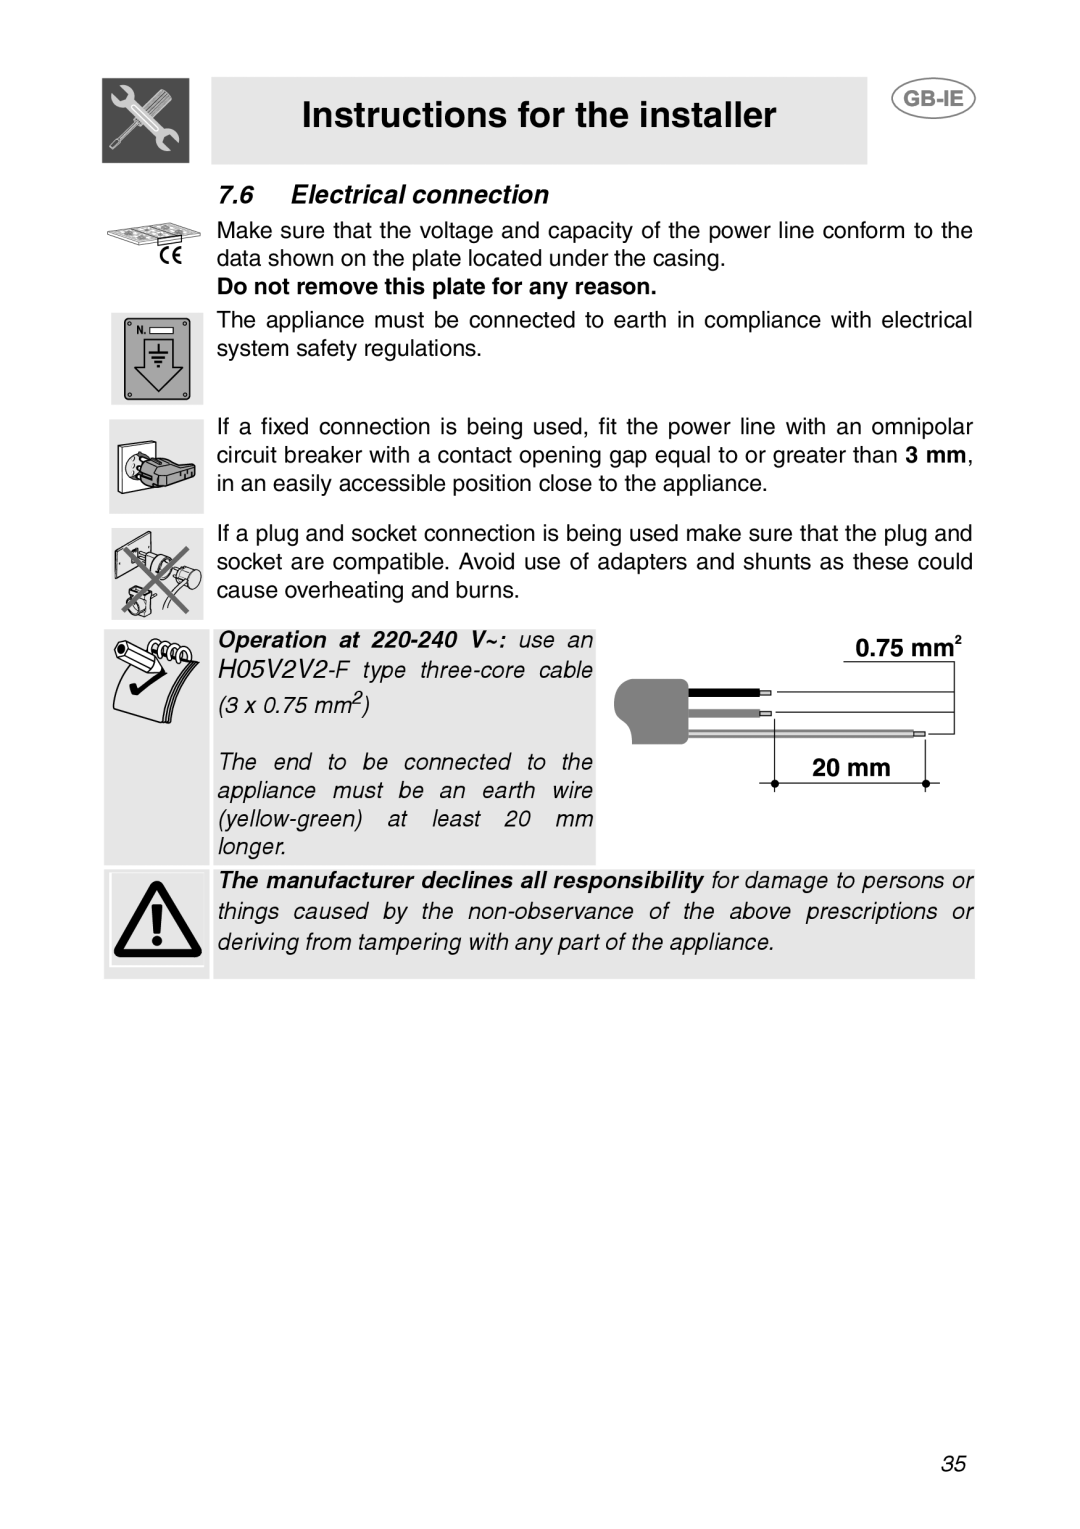 Smeg HB96GXBE3 Instructions for the installer, 7.6Electrical connection, Do not remove this plate for any reason, longer 